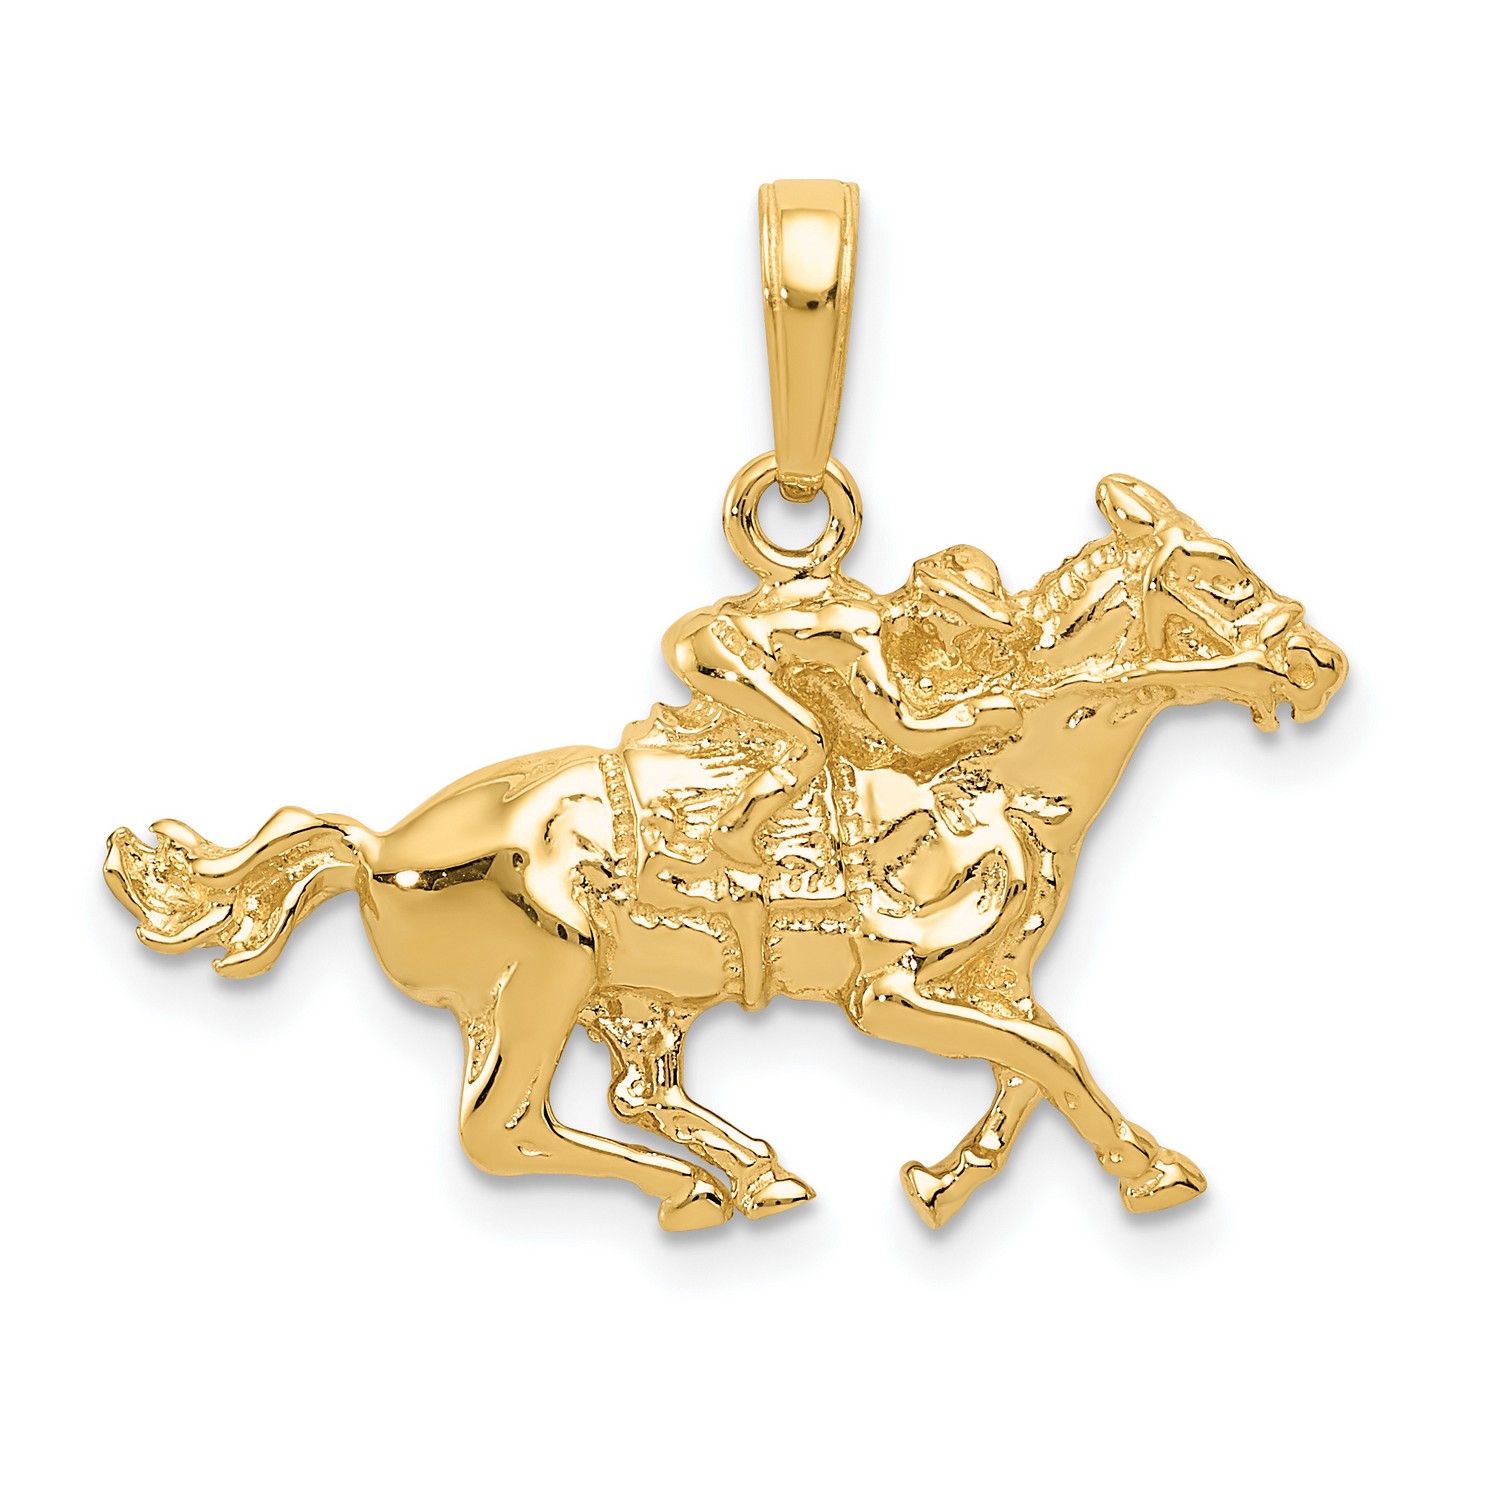 Pre-owned Jewelry Stores Network 14k Yellow Gold Jockey On Horse Racing Charm Pendant